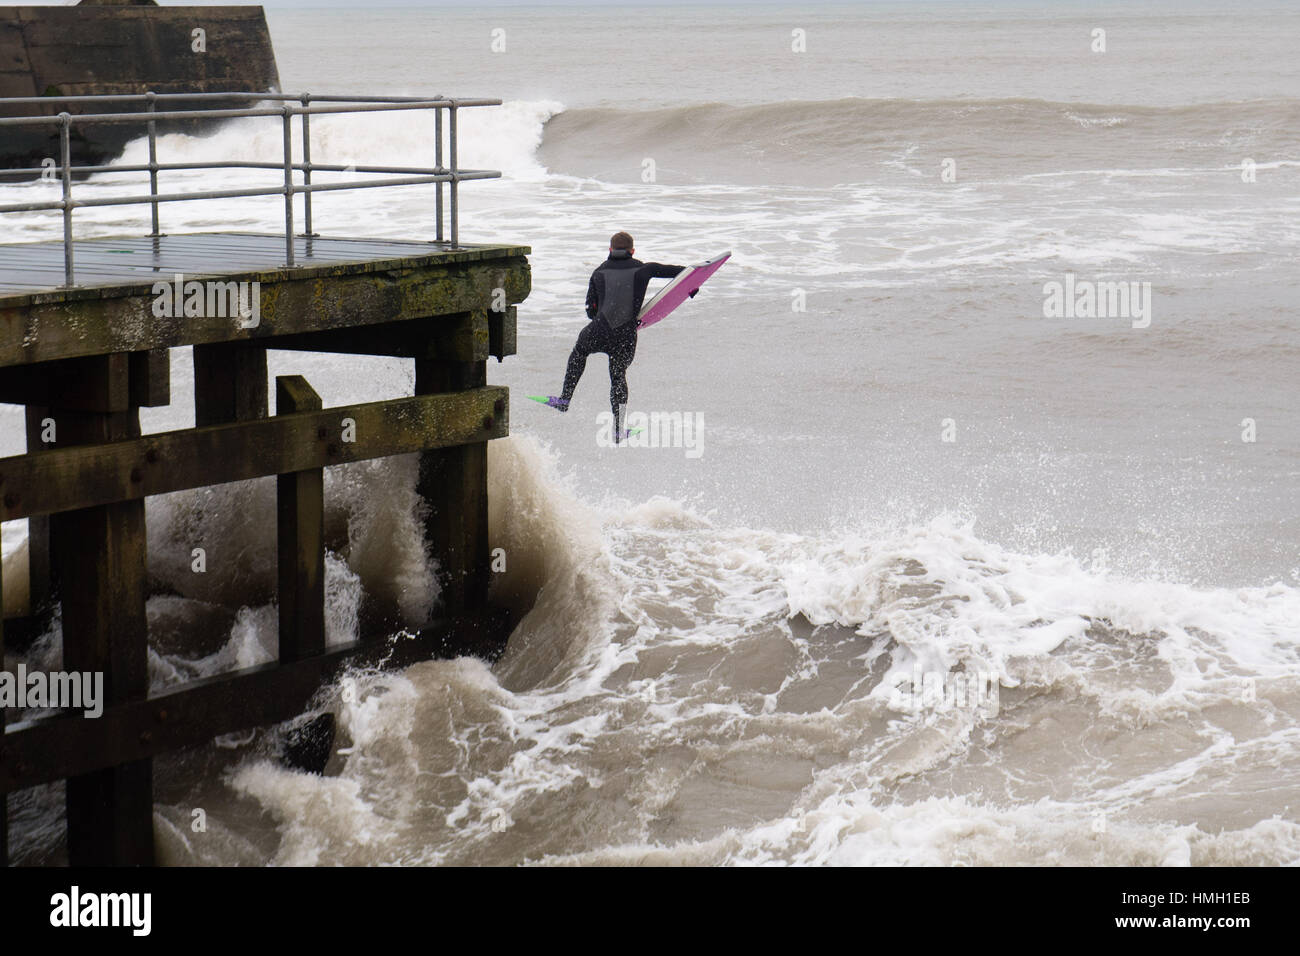 Aberystwyth, Ceredigion, Wales, UK. 3rd Feb, 2017. UK Weather. High tides and a strong Atlantic swell this morning bring huge waves crashing into the promenade and sea defences in Aberystwyth on the west wales coast. A brave body-boarder takes the opportunity of riding some of the huge 10' high waves as they break near Aberystwyth harbour Potentially damaging gales, with gusts in excess of 60mph are forecast to strike parts of southern UK today photo Credit: Keith Morris/Alamy Live News Stock Photo